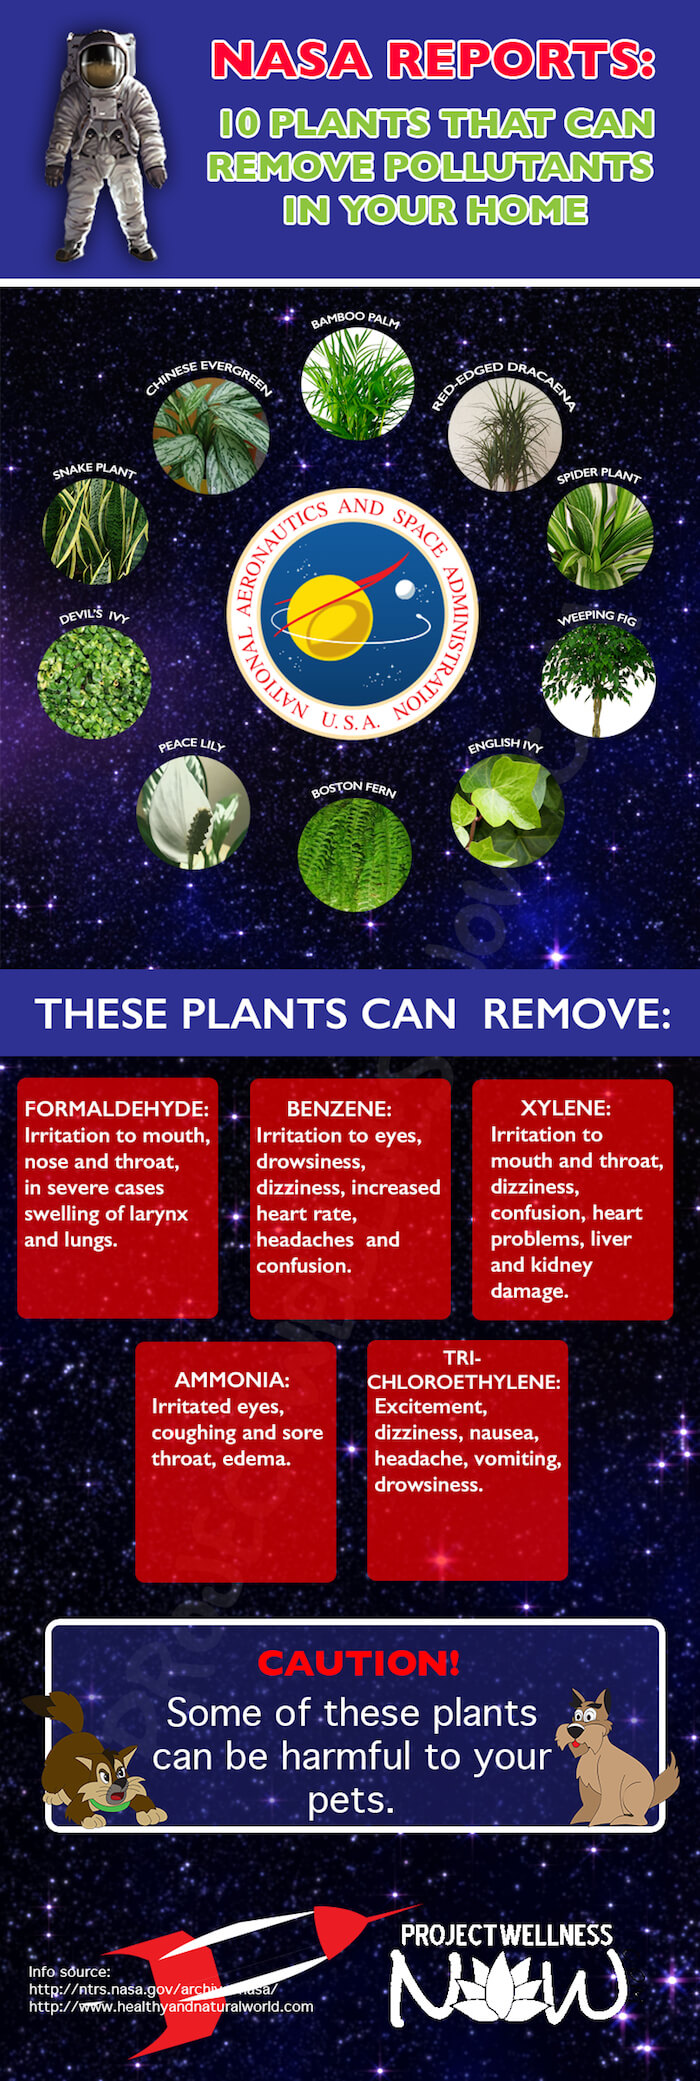 plants that clean air in your home